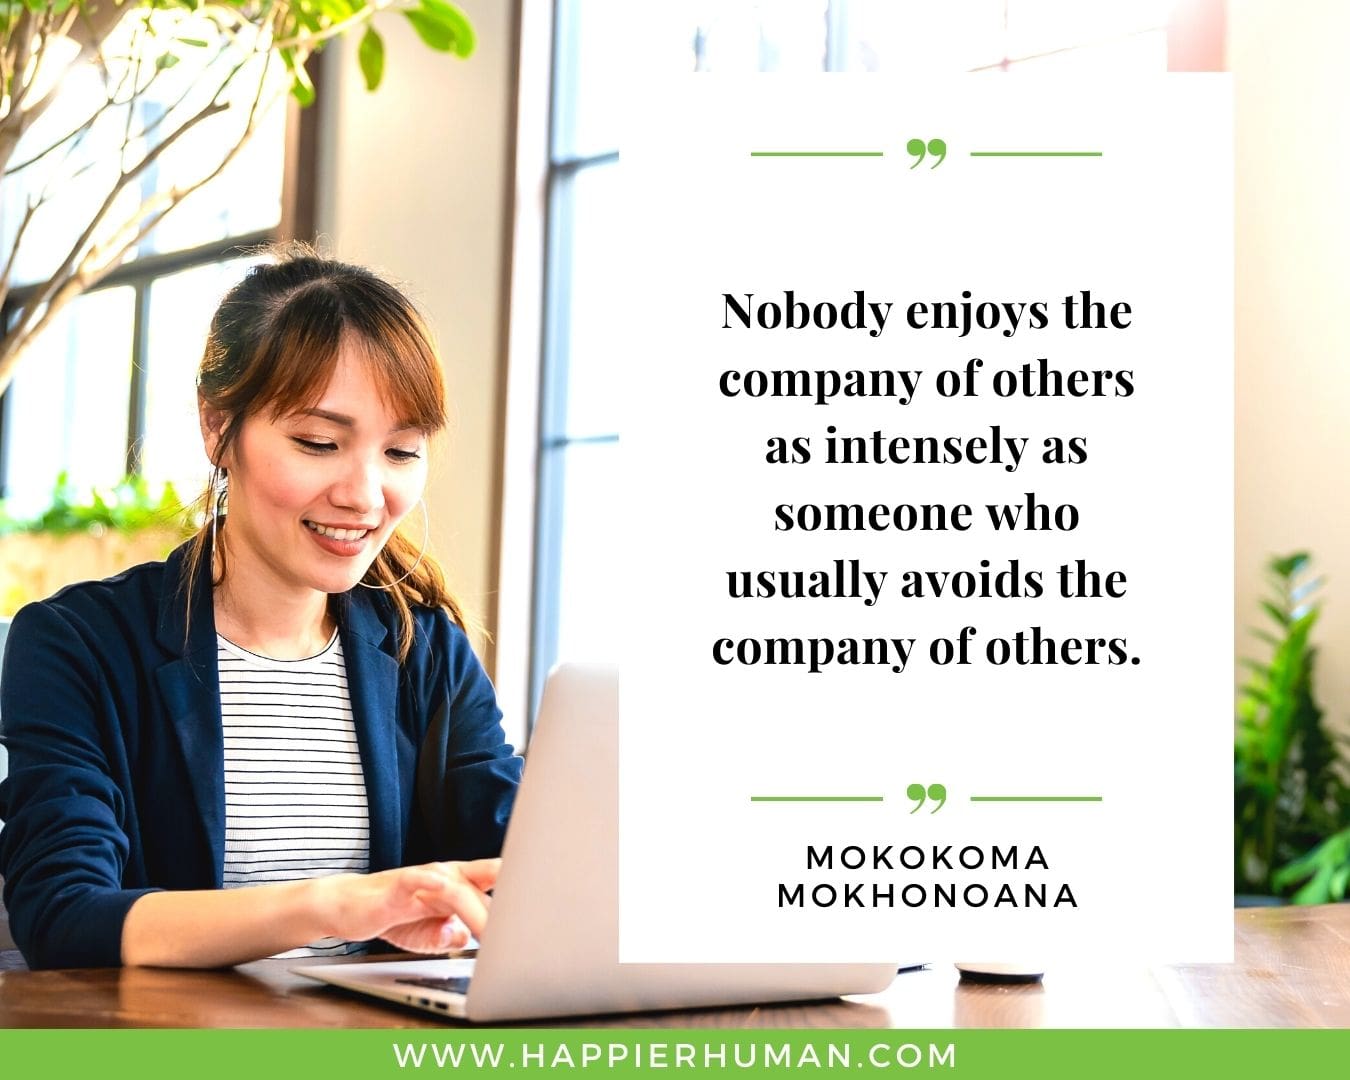 Introvert Quotes - “Nobody enjoys the company of others as intensely as someone who usually avoids the company of others.” – Mokokoma Mokhonoana